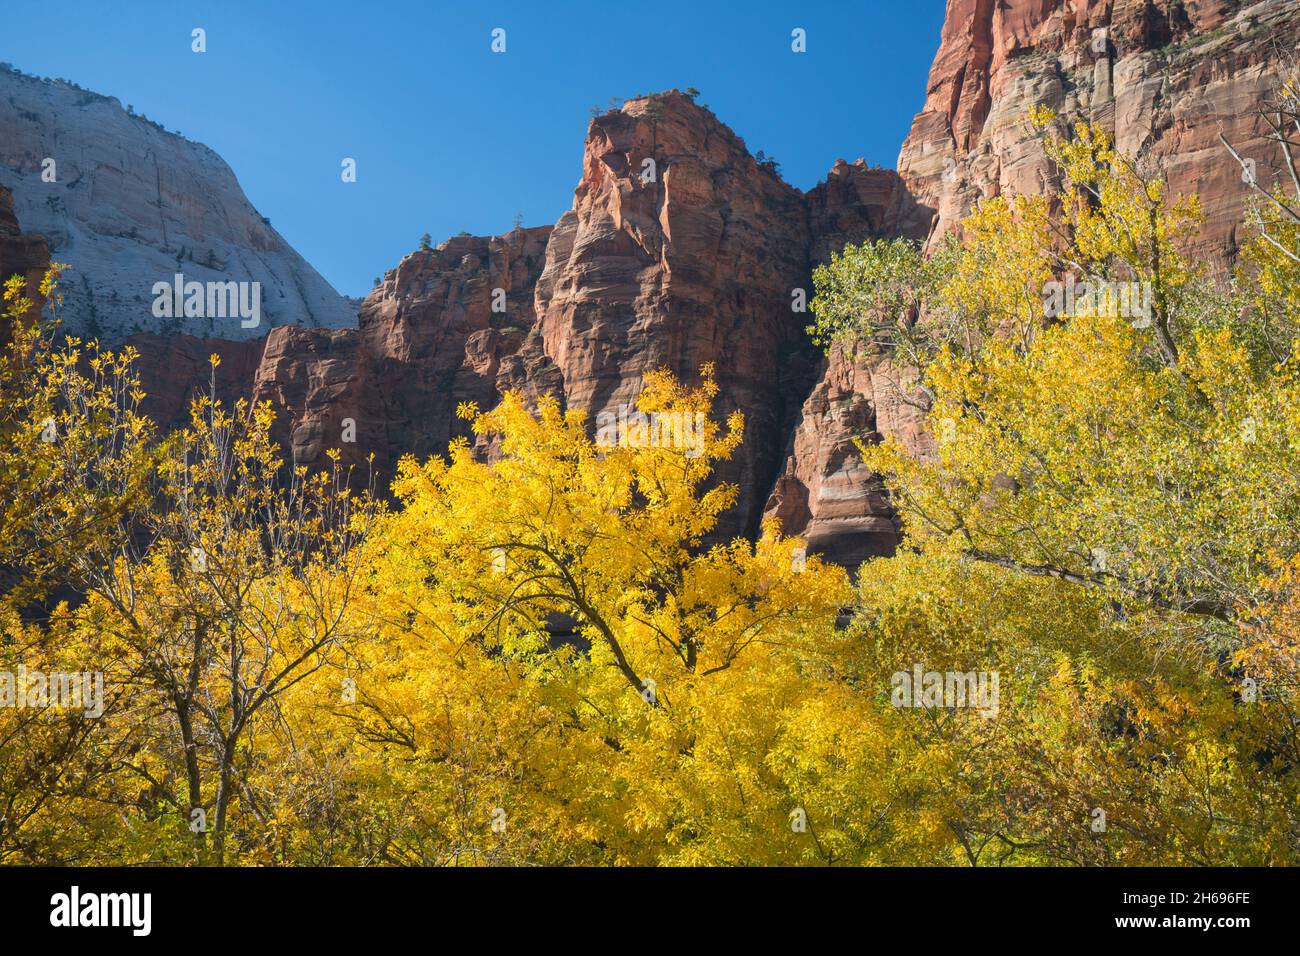 Zion National Park, Utah, USA. View across the wooded floor of Zion Canyon to the red sandstone cliffs of Angels Landing, autumn. Stock Photo